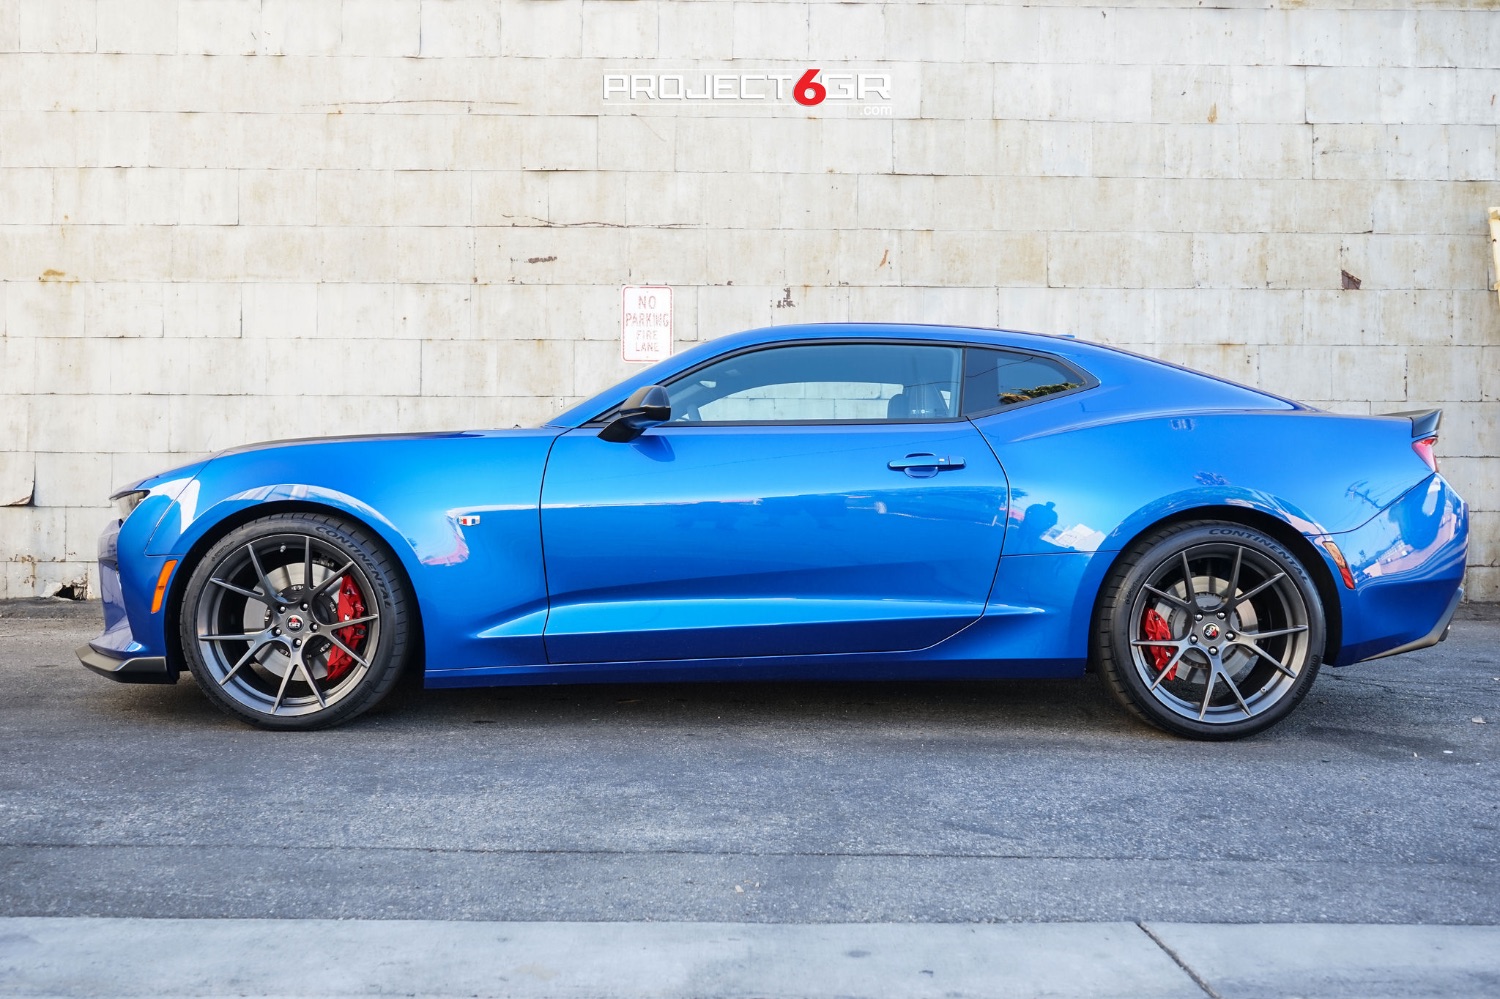 chevrolet-camaro-2-ss-zl1-blue-project-6gr-10-ten-full-forged-gloss-graphite-03